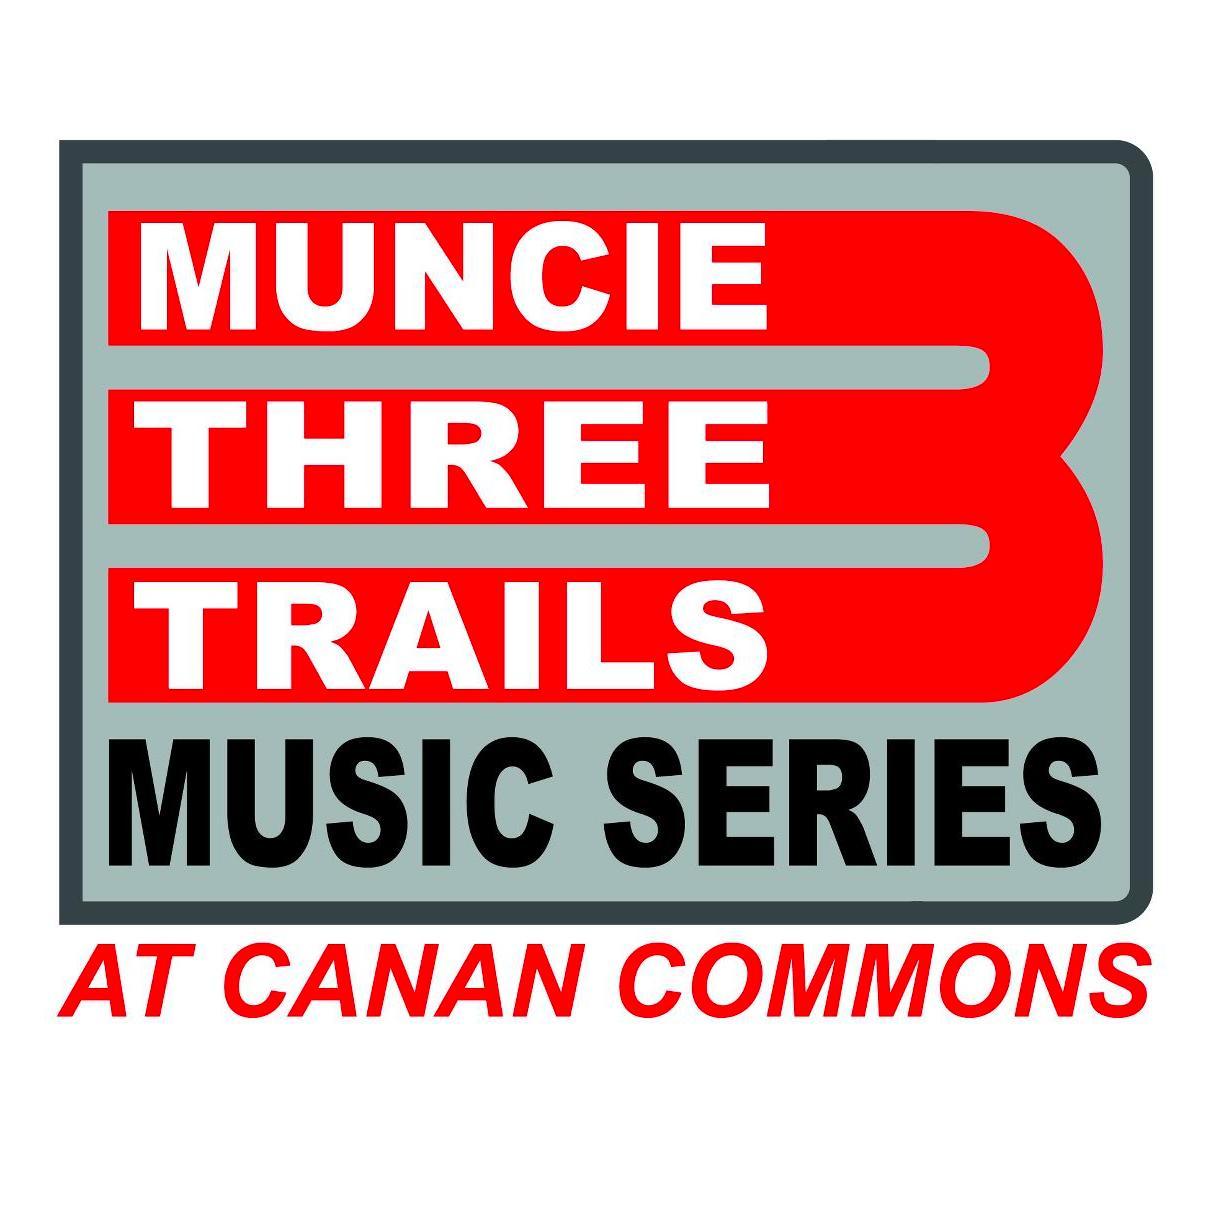 The Muncie Three Trails Music Series aims to bring critically acclaimed, national recording artists to Canan Commons, Muncie's newest outdoor performance venue.